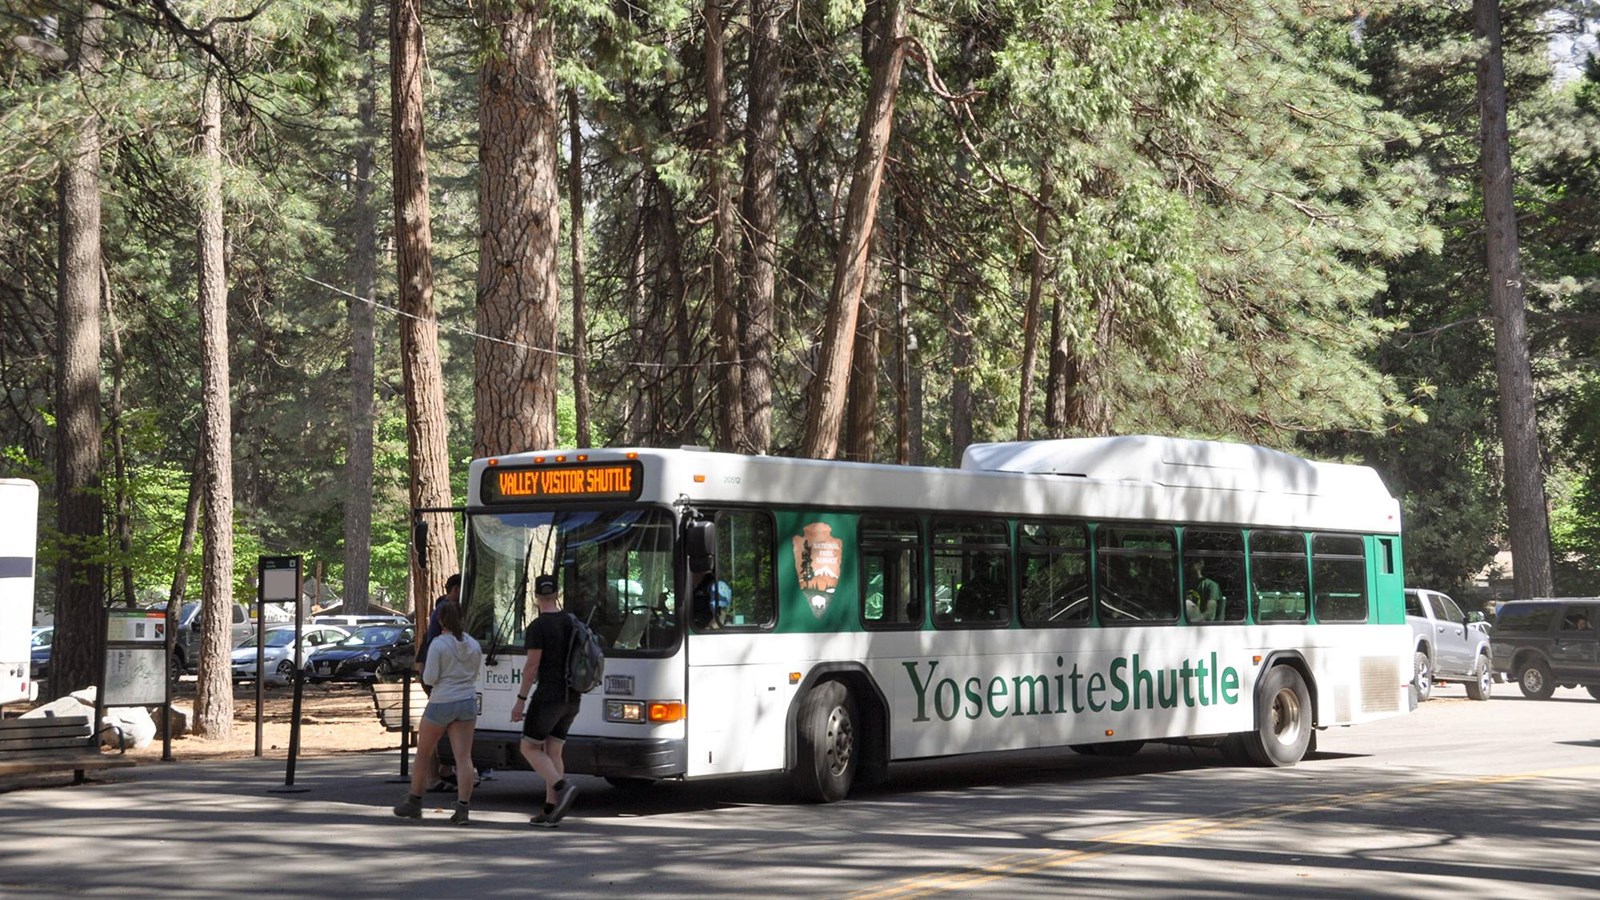 Shuttle at stop near dirt parking area with visitors crossing the street to get on the bus.